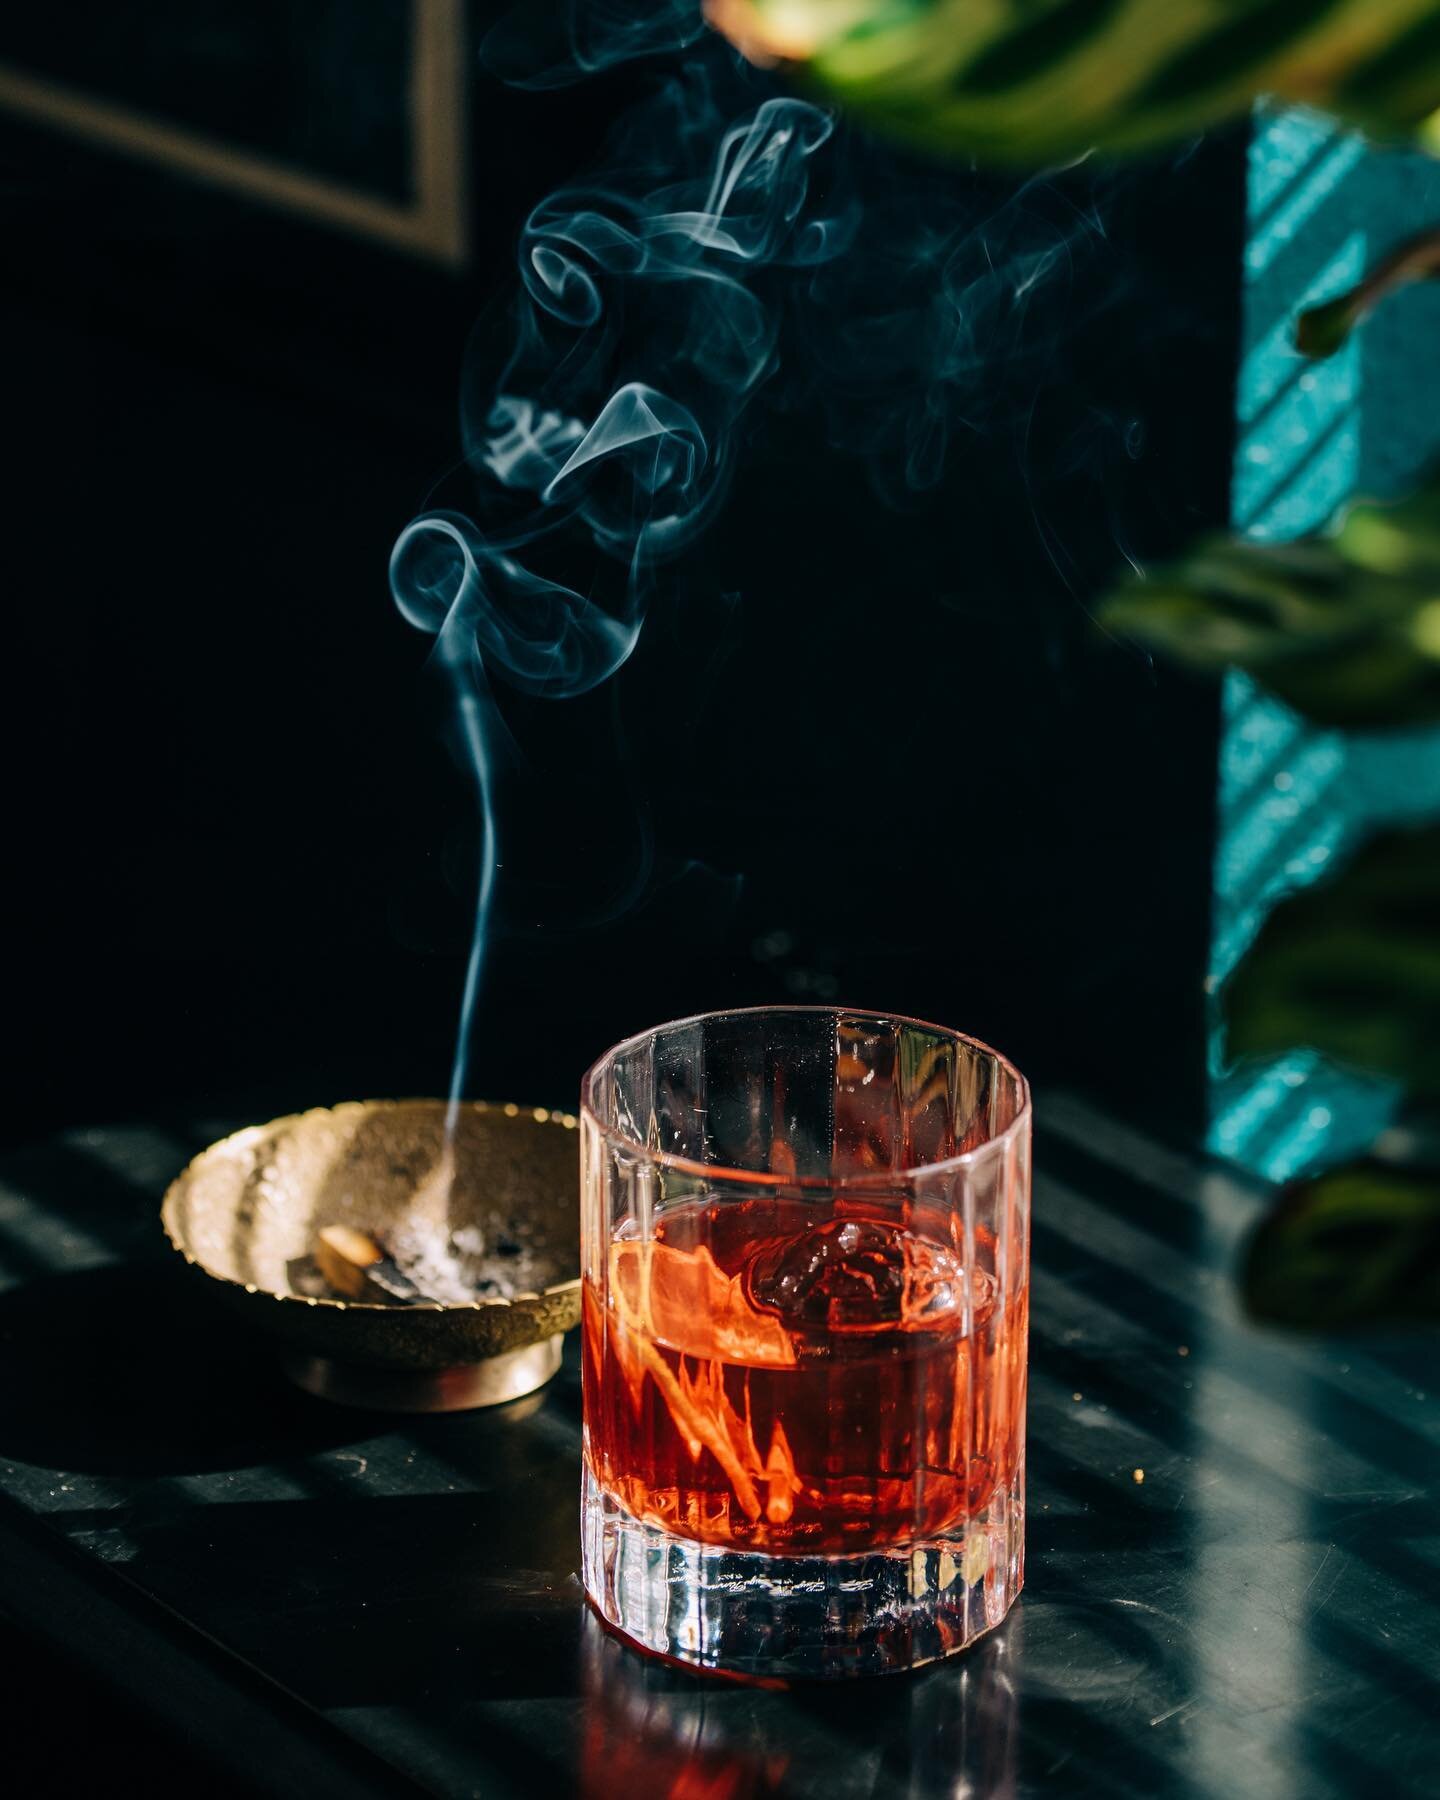 Provoke your spirit. A simple Dehy orange slice in a classic Negroni.